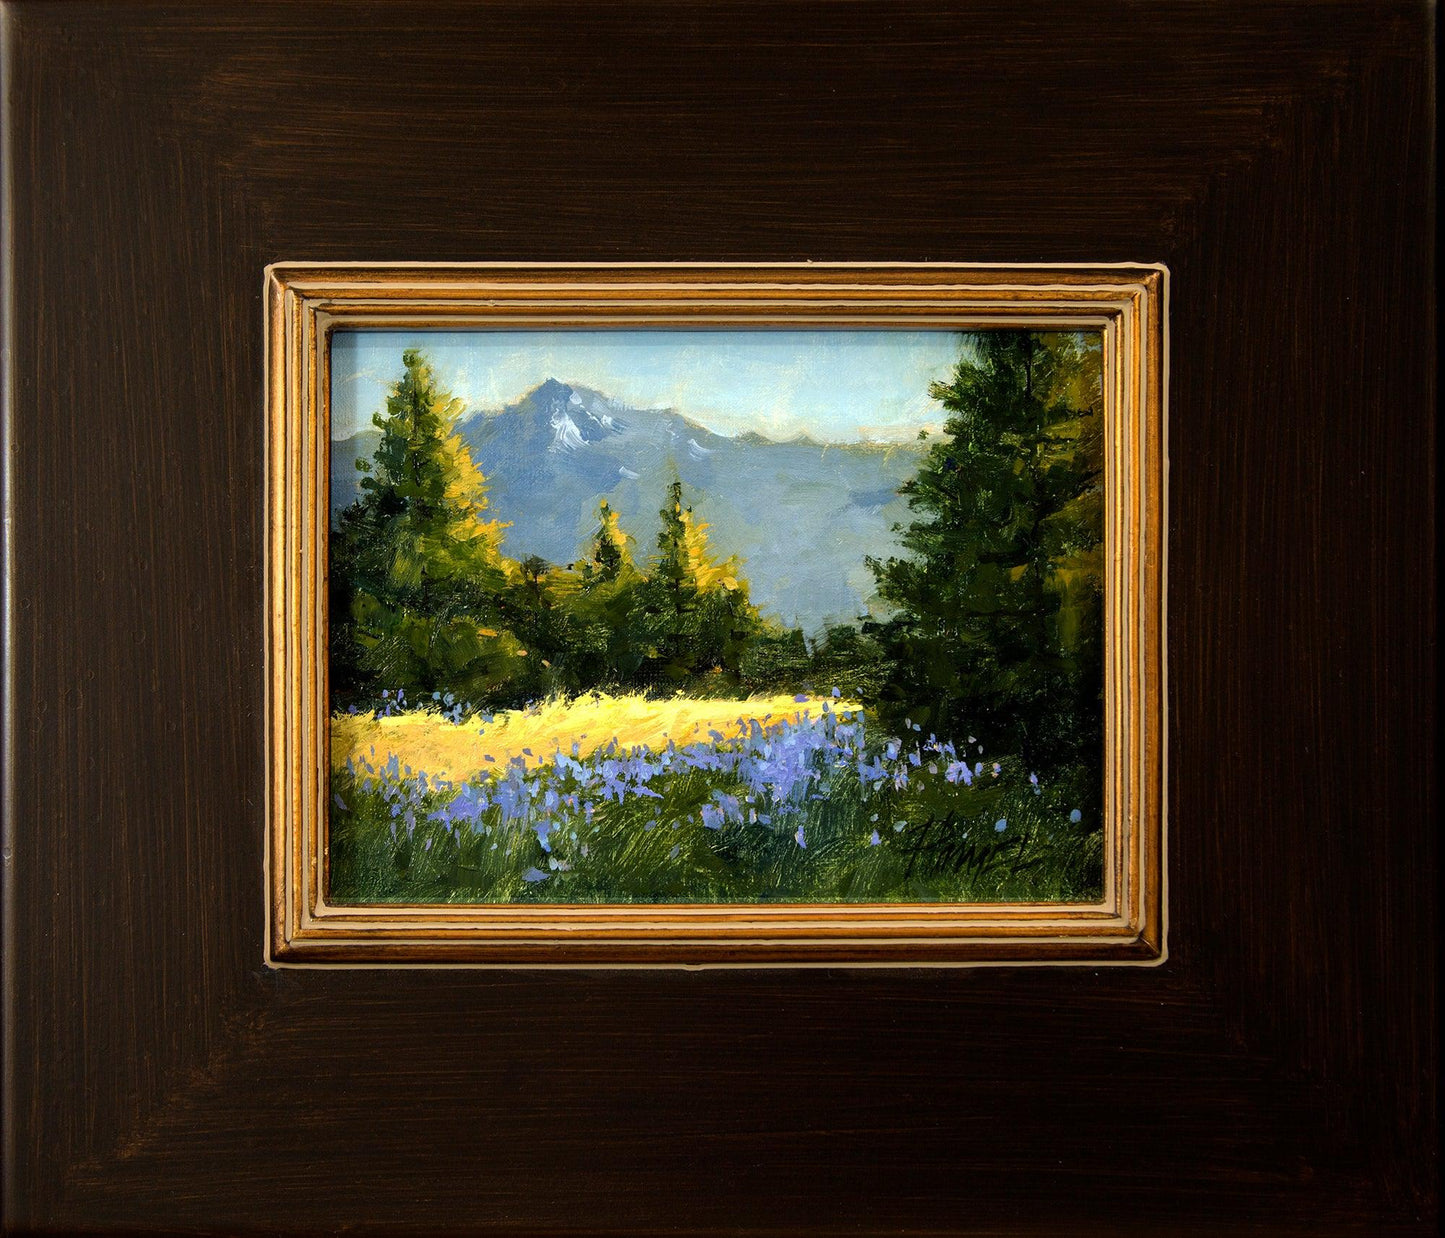 Lupine Meadow-Painting-Peggy Immel-Sorrel Sky Gallery